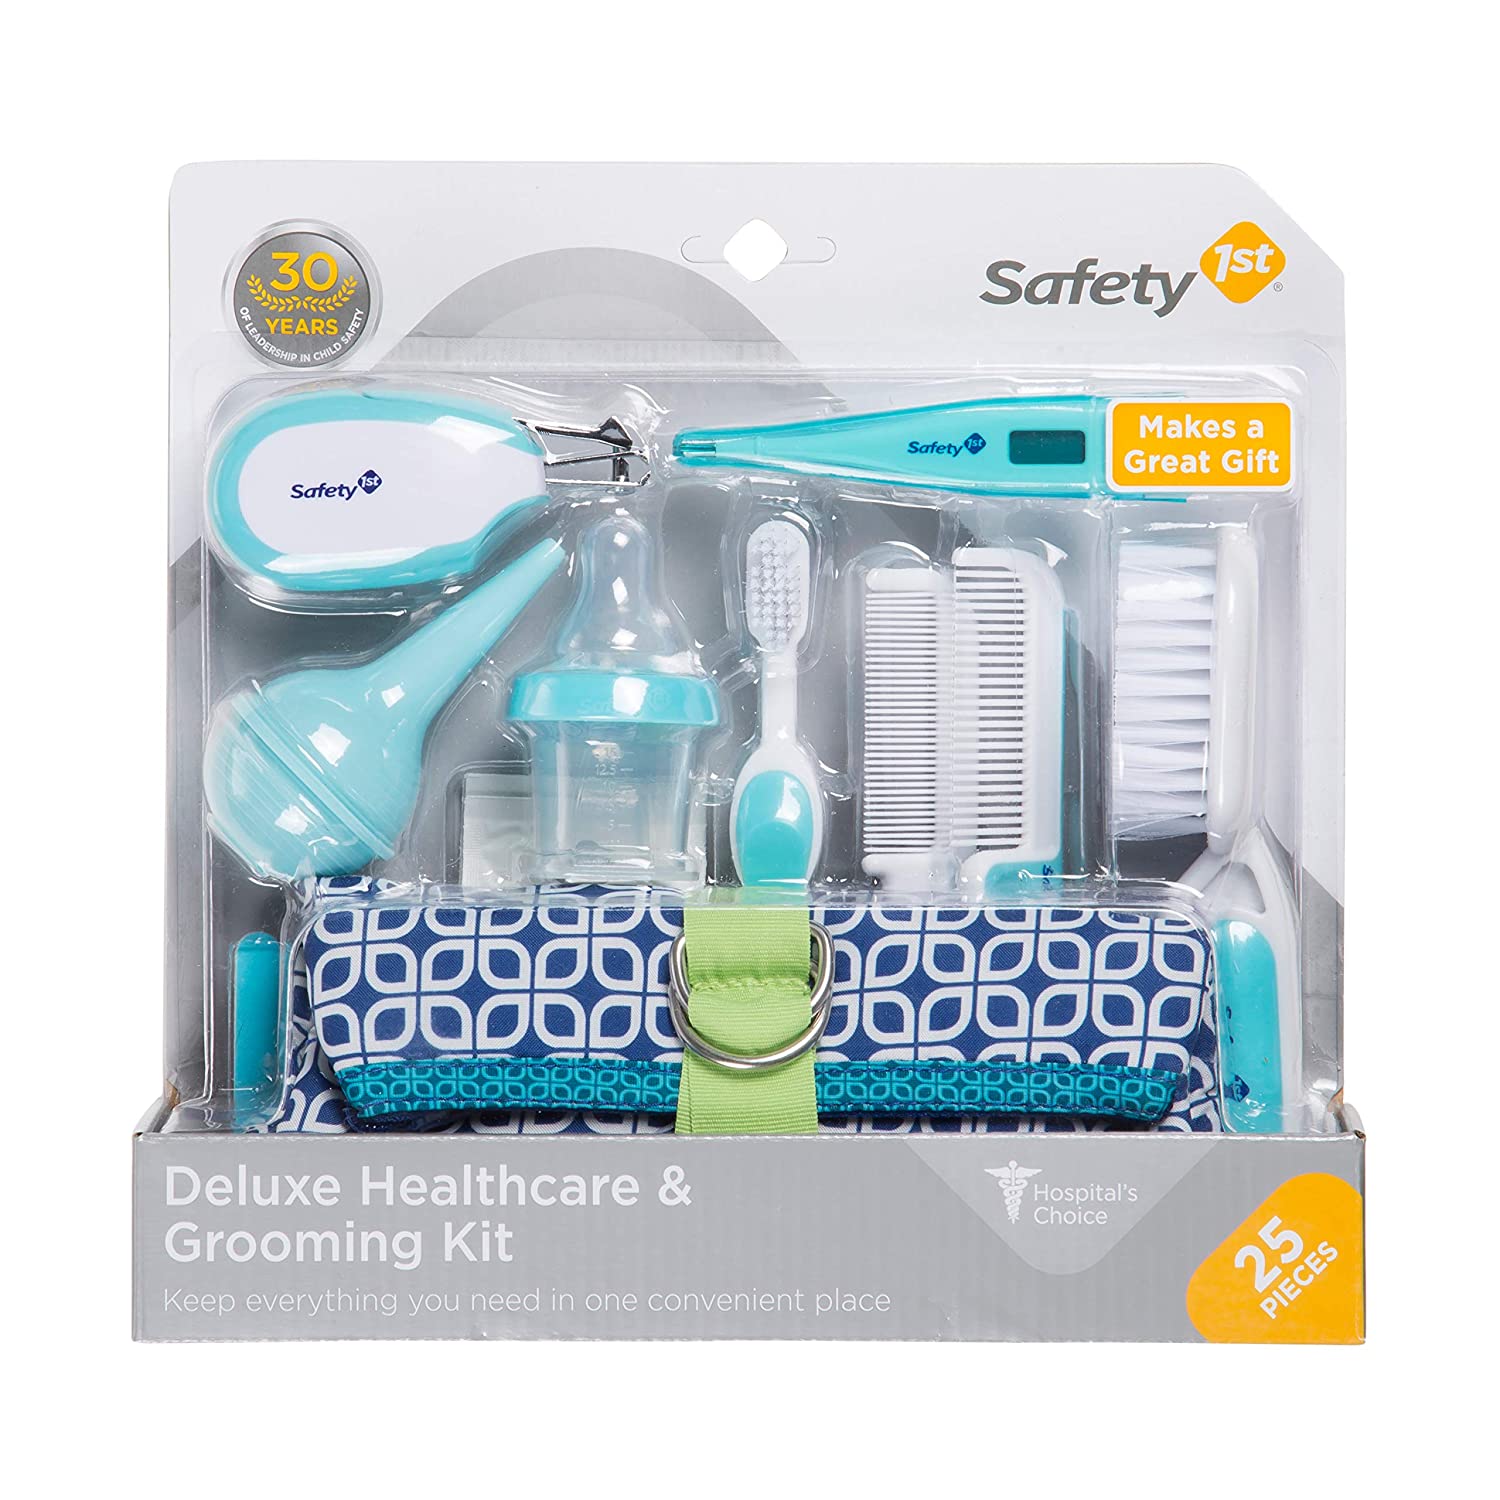 Healthcare and Grooming Kit for Baby